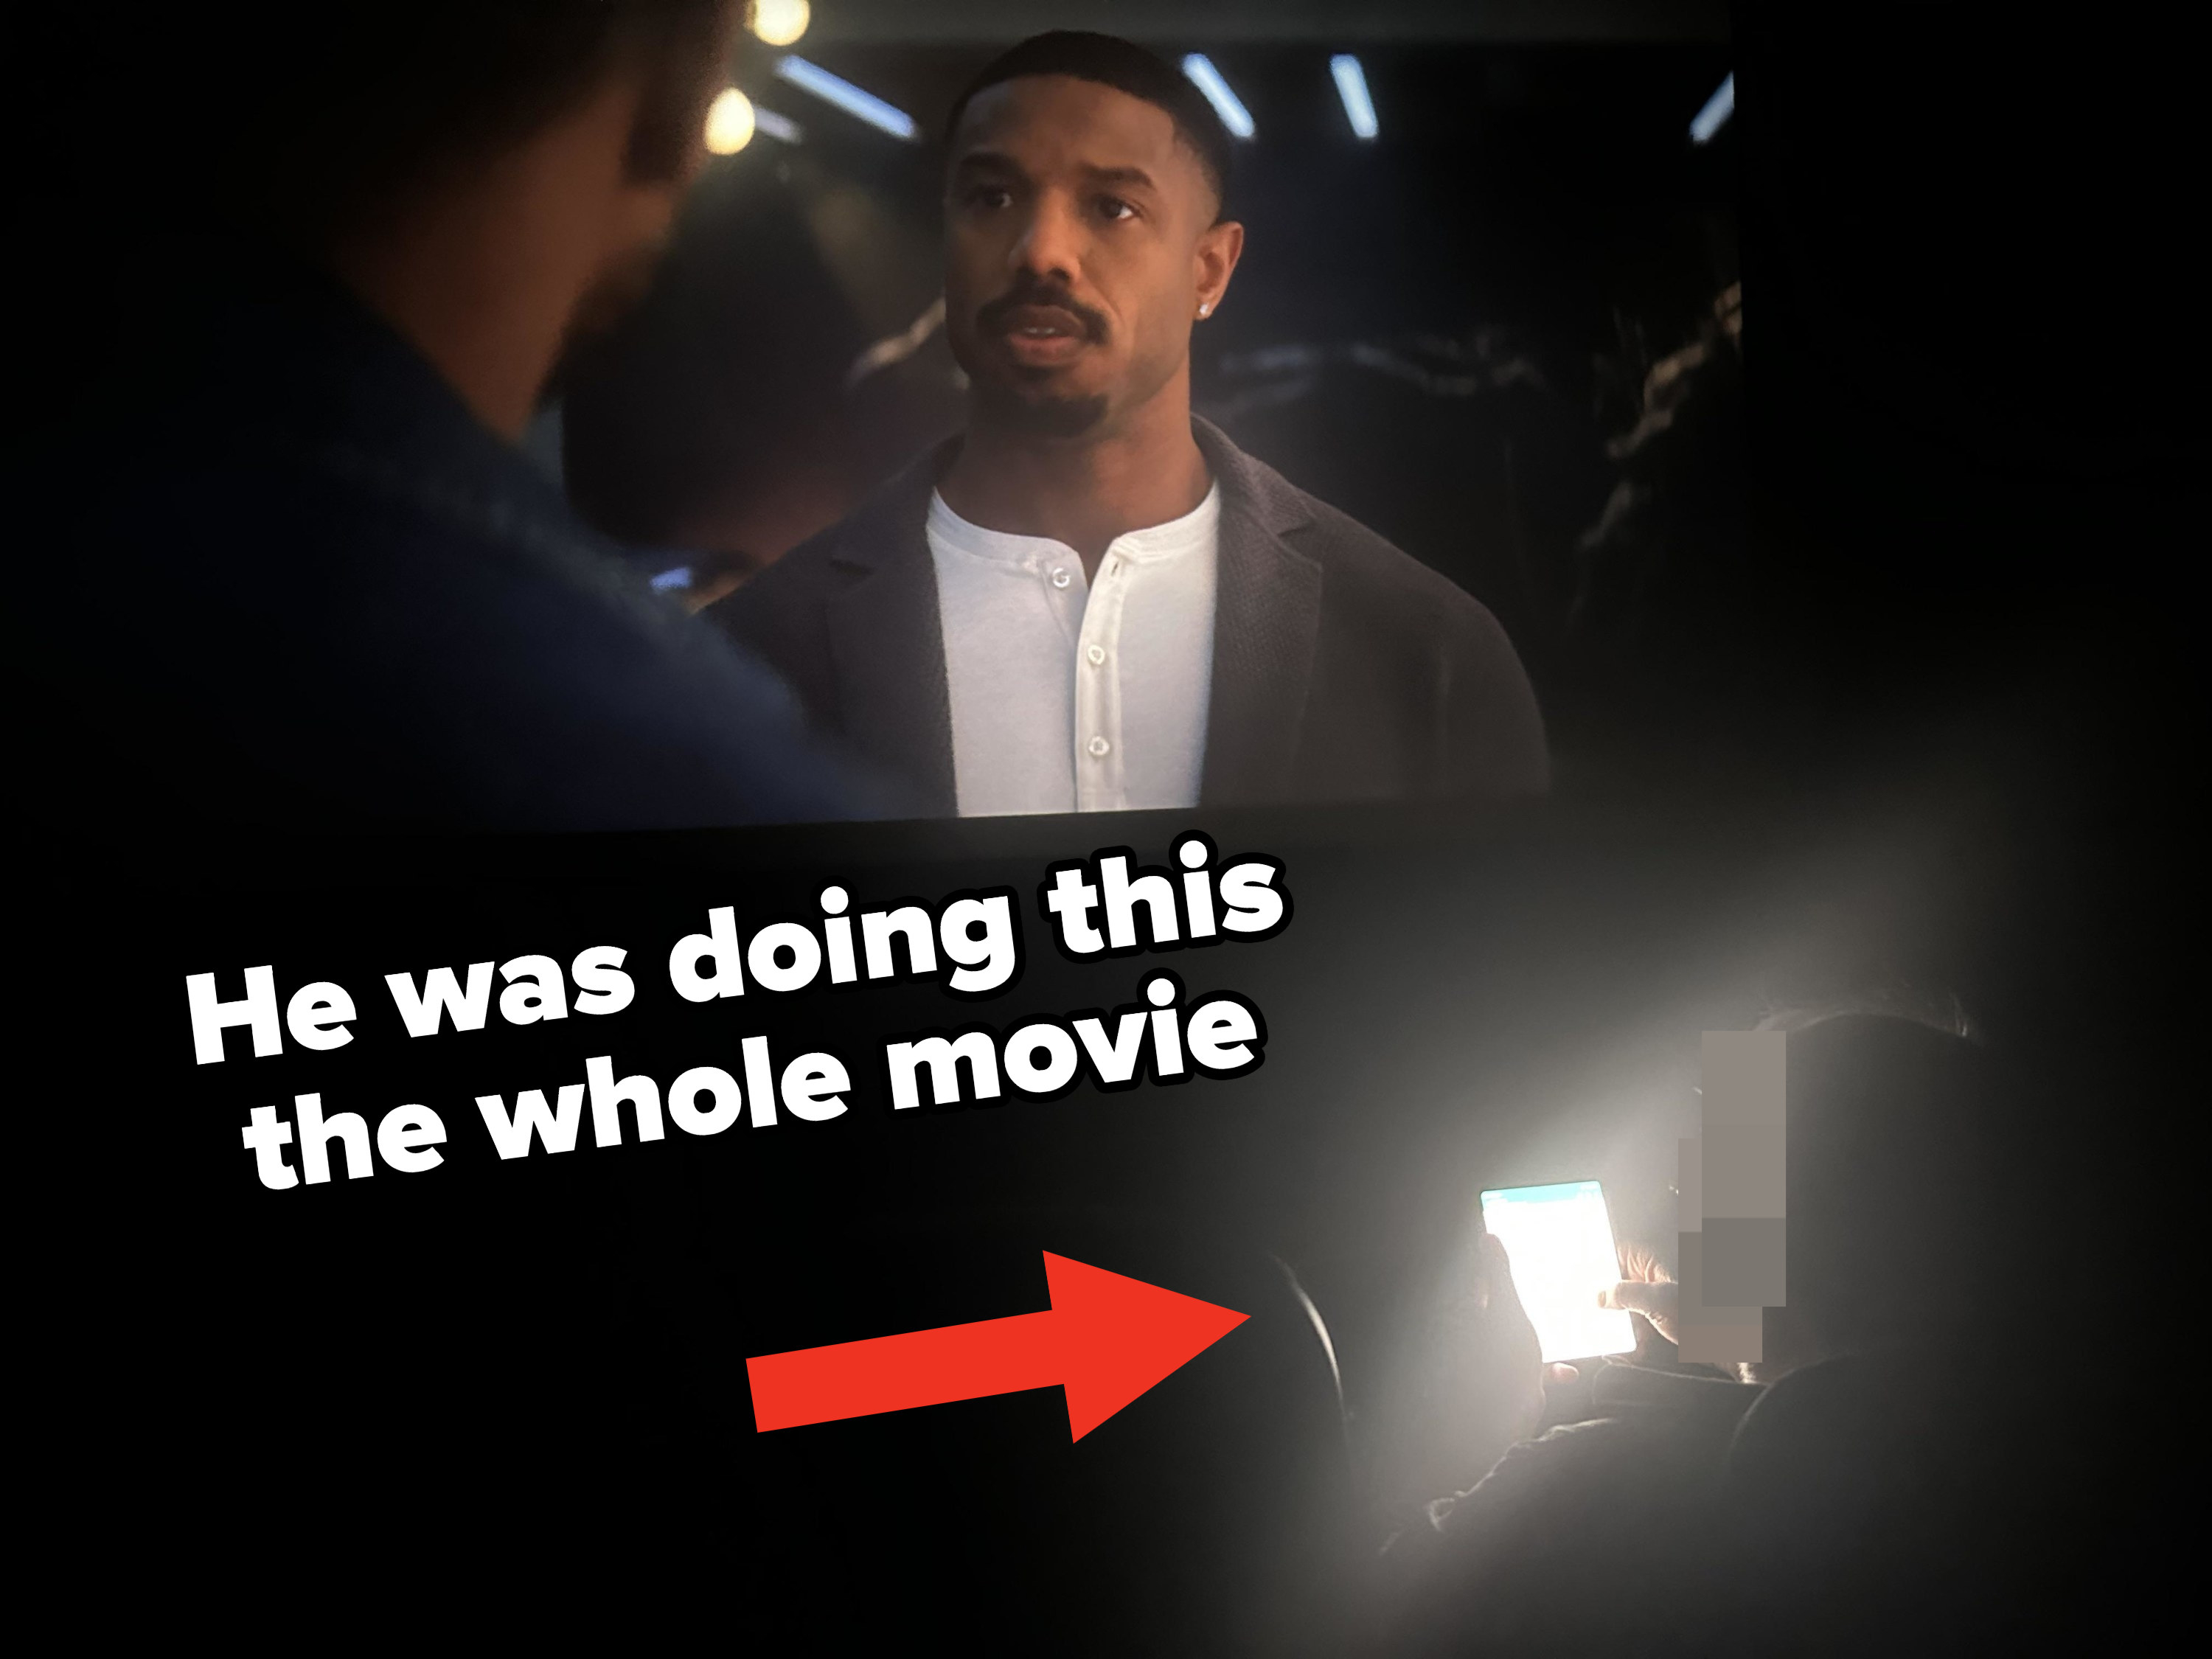 Someone using their phone in a movie